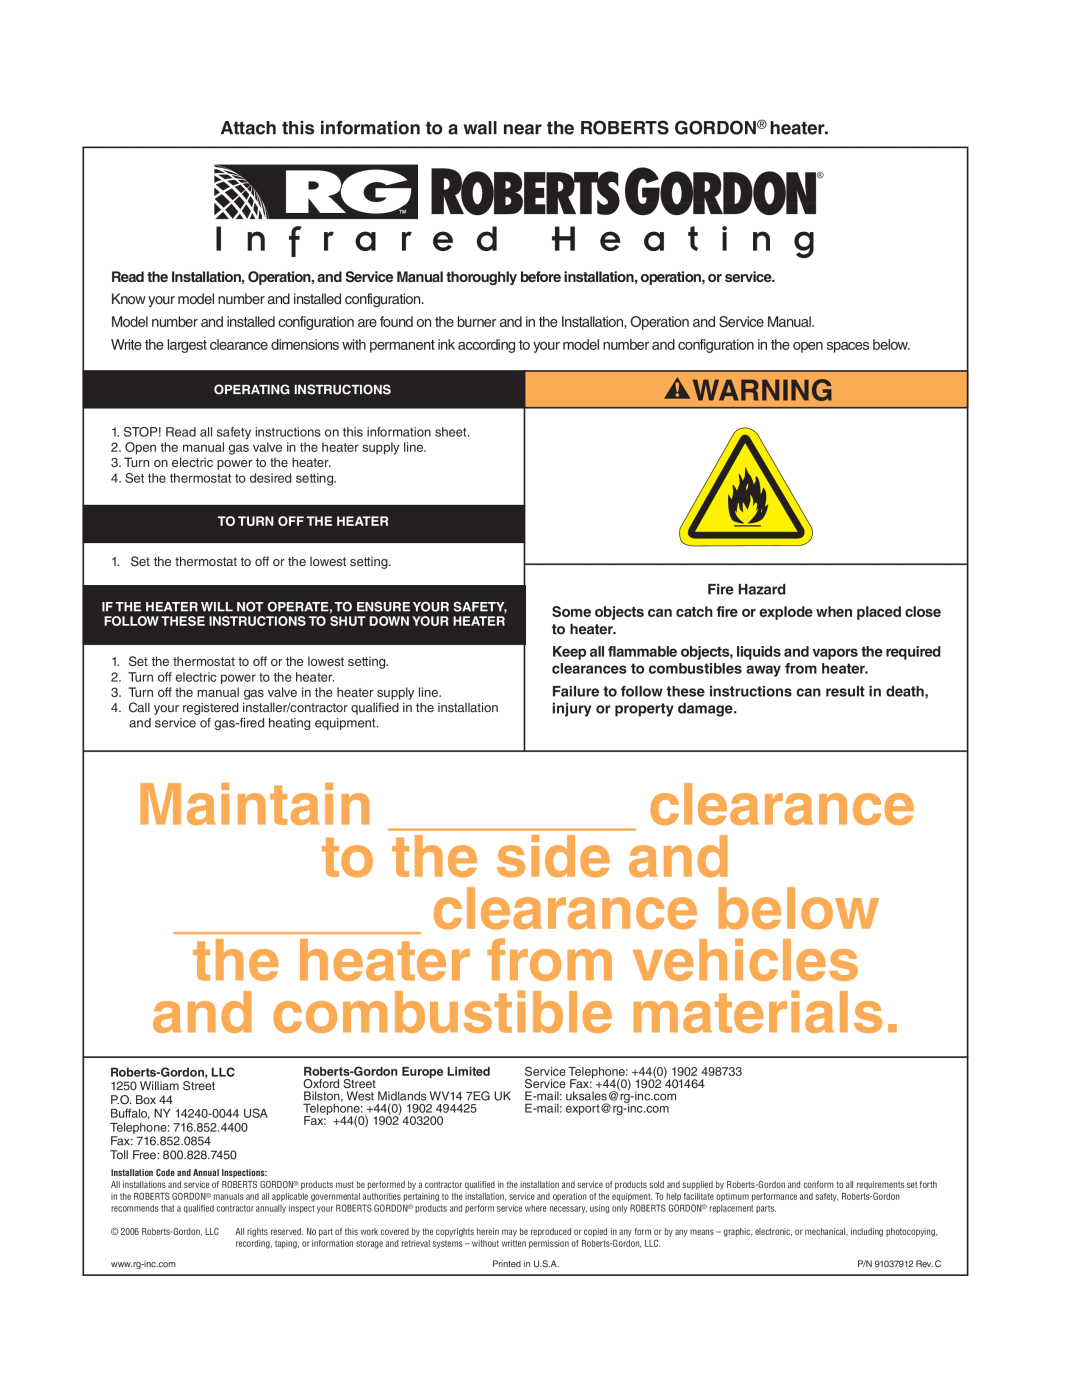 Roberts Gorden CRV-B-8 Maintain ???? cm clearance to the side and, I n f r a r e d H e a t i n g, Fire Hazard, to heater 